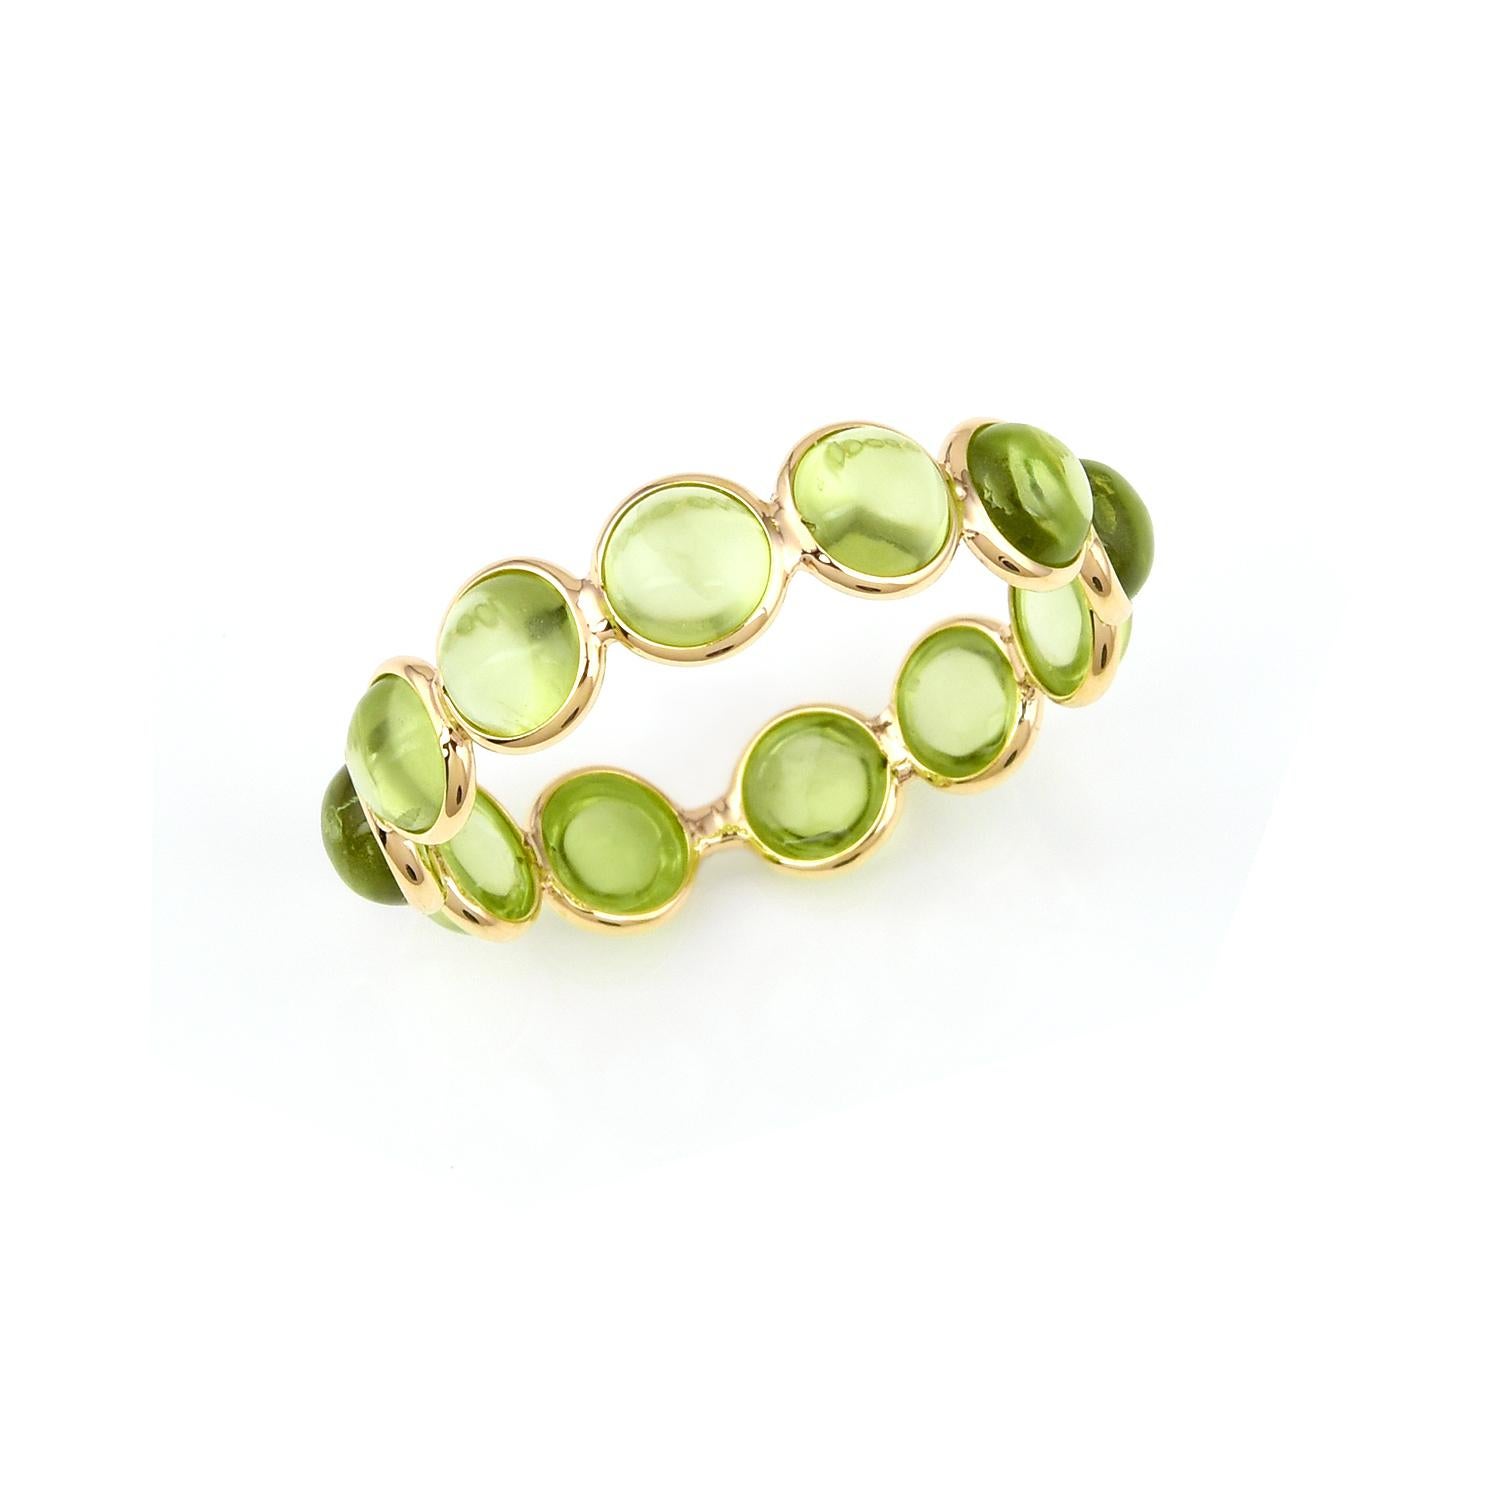 Shape: Round Cabochon

Stone: Peridot

Metal: 14 Karat Yellow Gold (can be customized)

Style: Single Line Band

Ring Size: US 6.50 (can be customized)

Stone Weight: appx. 4.70 carats of Peridot

Total Weight: 1.50 grams